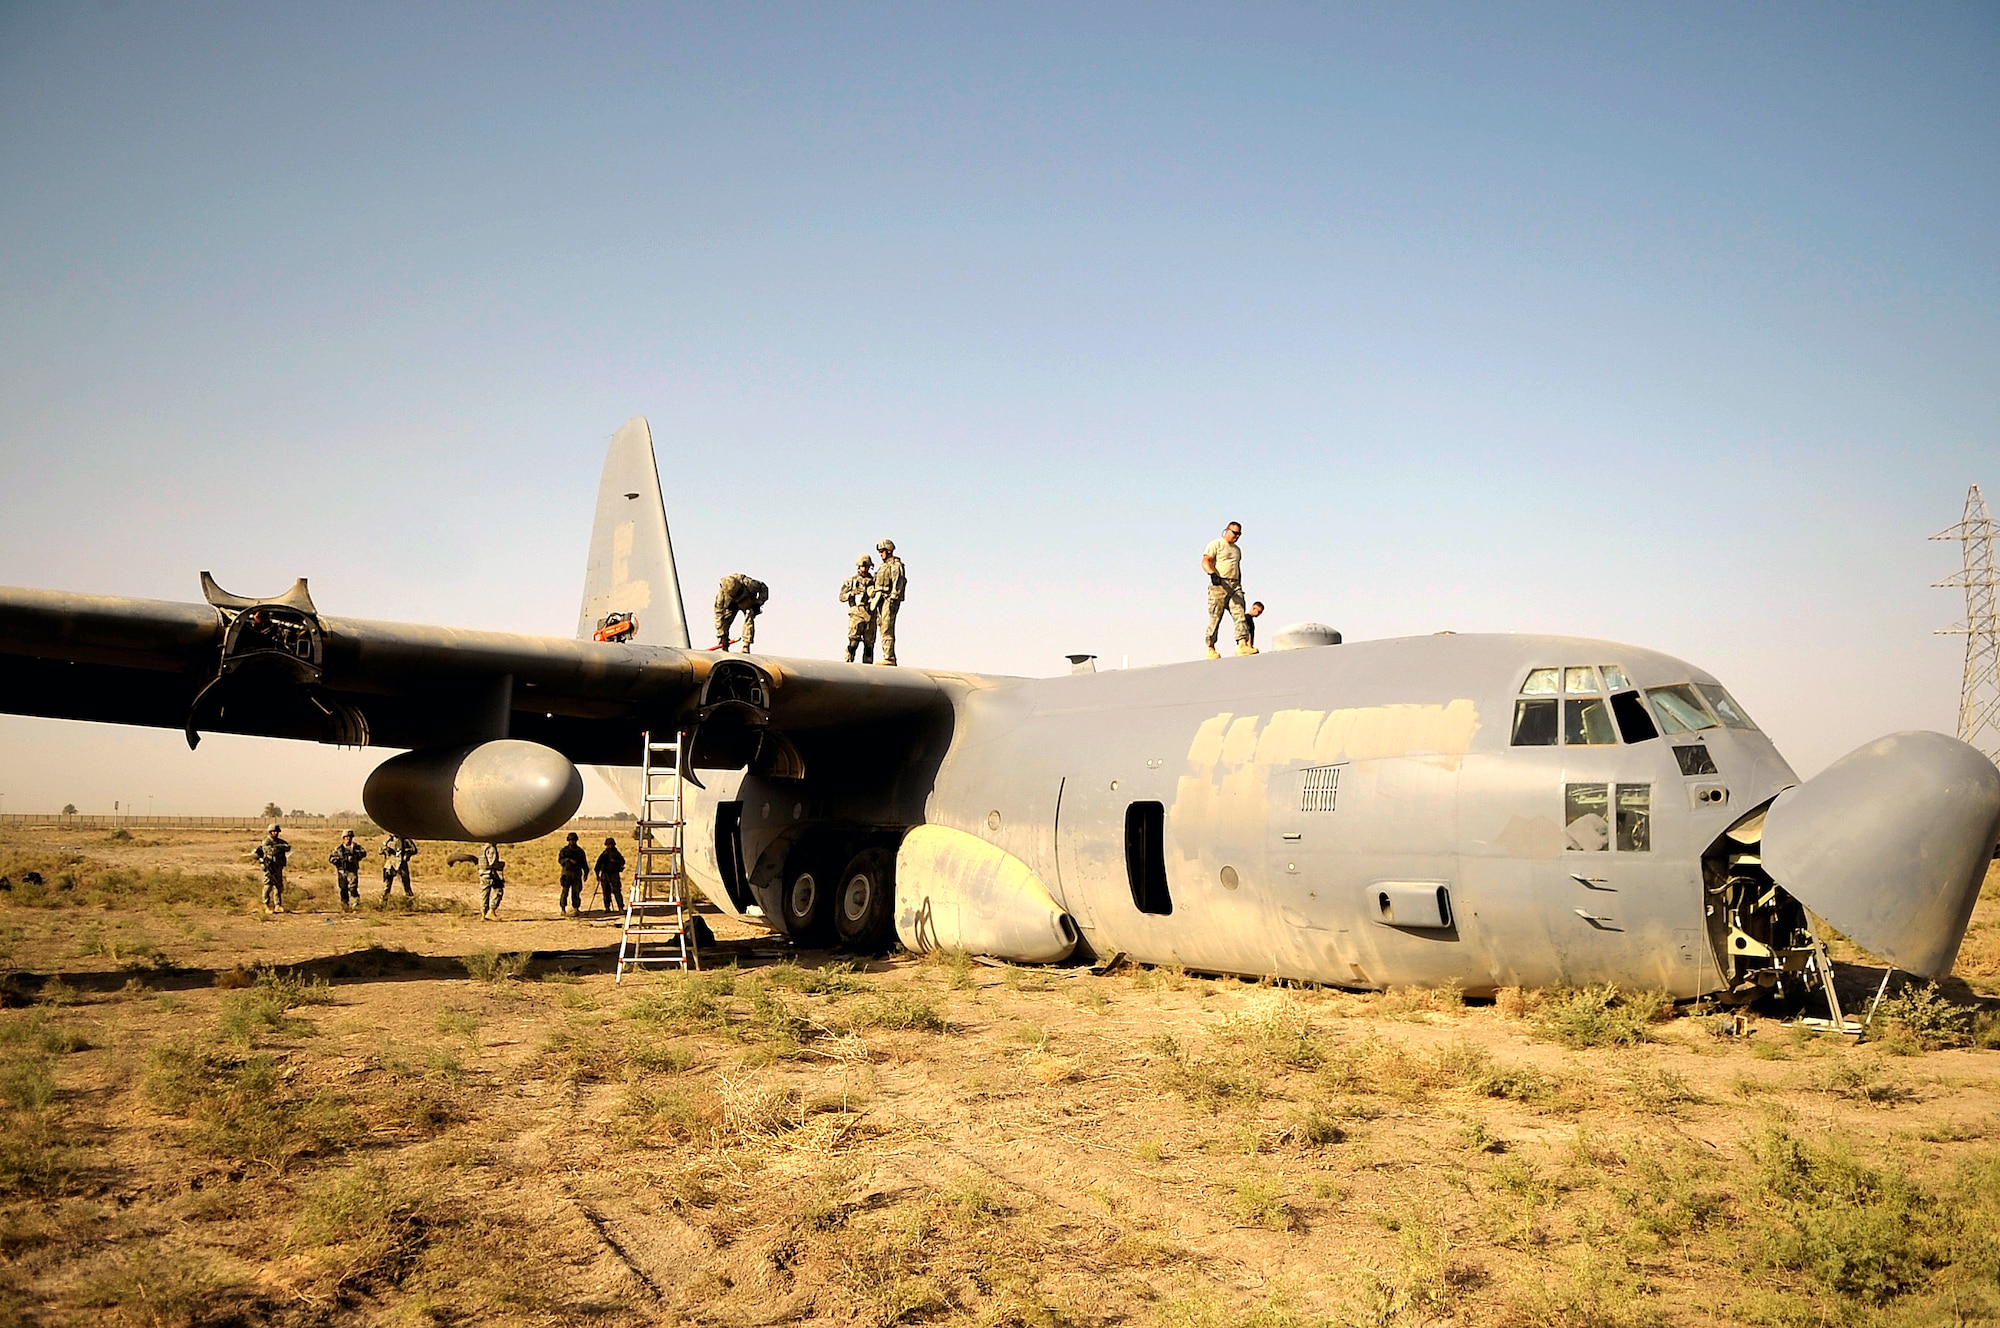 Maintenance and explosive ordnance disposal personnel from the 447th Air Expeditionary Group prepare to place explosive charges on the wings of a C-130 Hercules aircraft that are designed to divide the plane into smaller sections so it can be moved July 7 in Baghdad, Iraq. The C-130 made an emergency landing in a field north of the Baghdad International Airport shortly after take-off on June 27. (U.S. Air Force photo/Tech. Sgt. Jeffrey Allen)